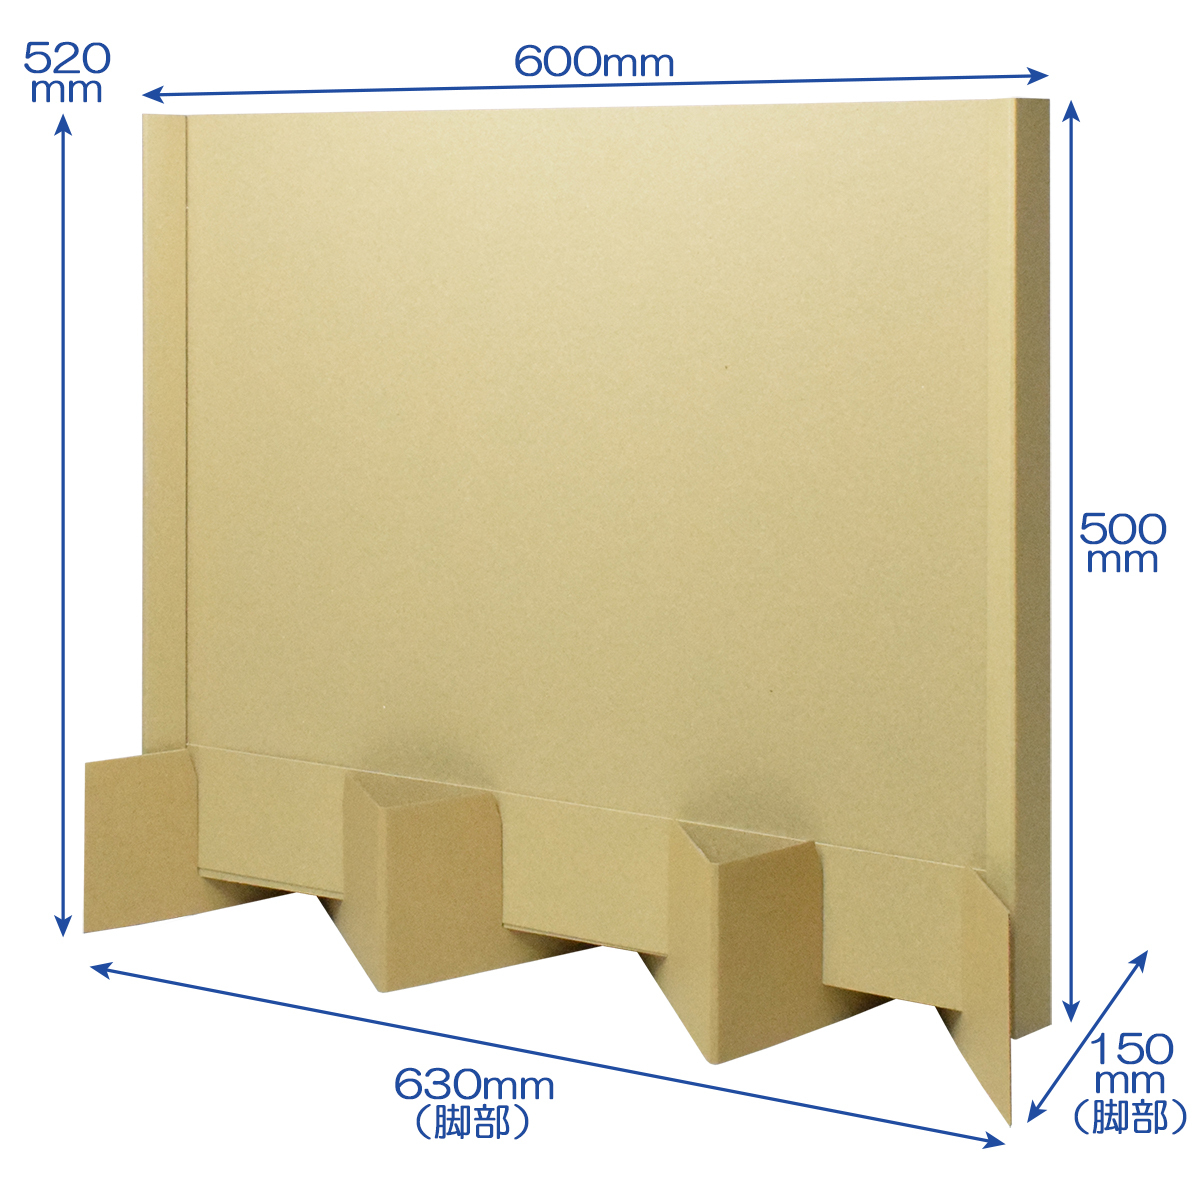  window none simple partition 1 set (pa-teshon partition partitioning screen feeling . prevention spray prevention u il s measures cardboard made construction type )